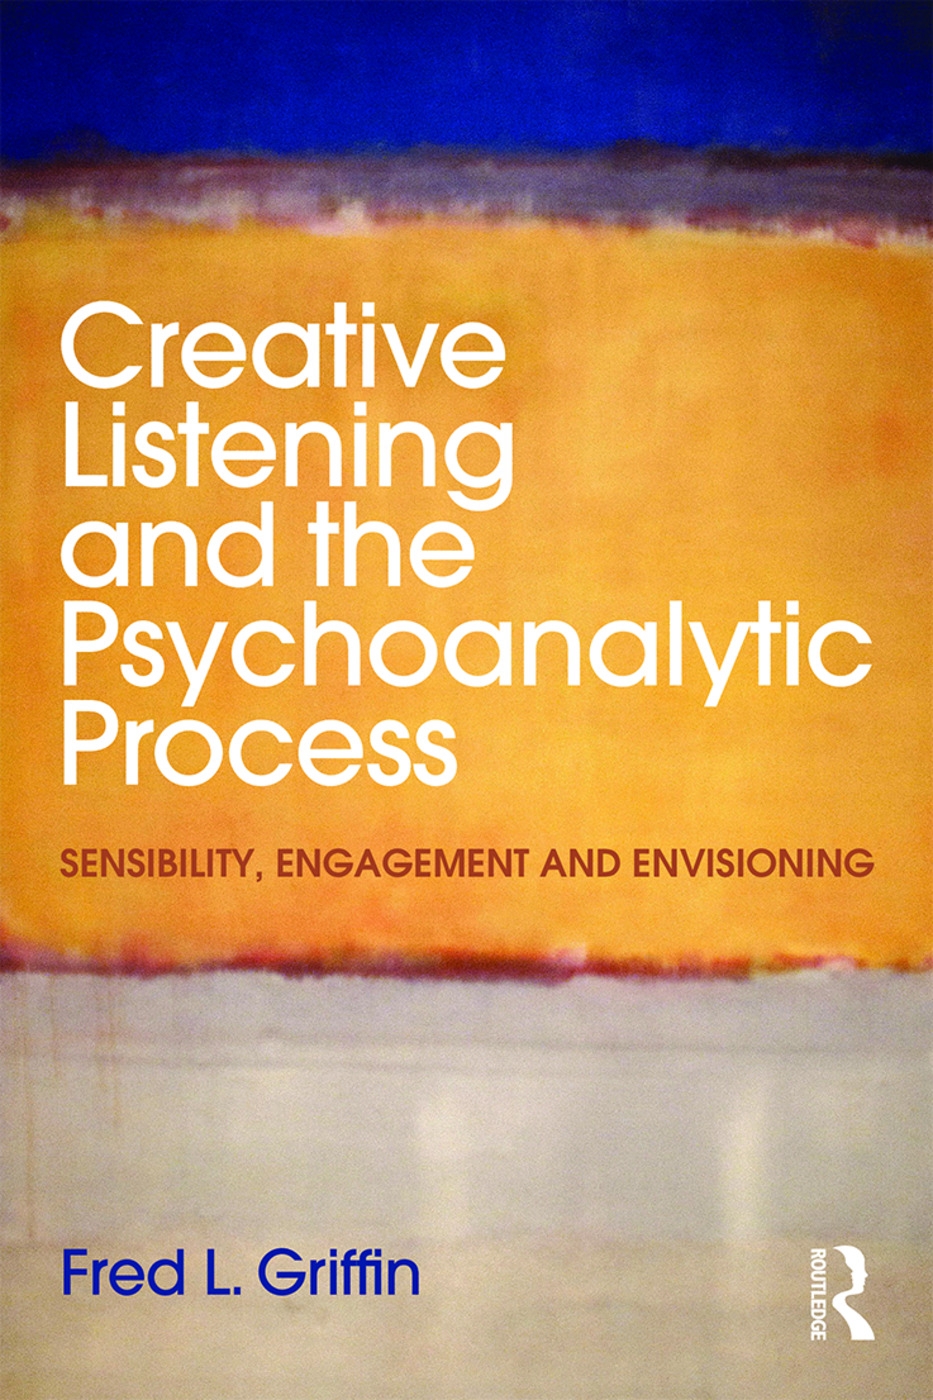 Creative Listening and the Psychoanalytic Process: Sensibility, Engagement and Envisioning